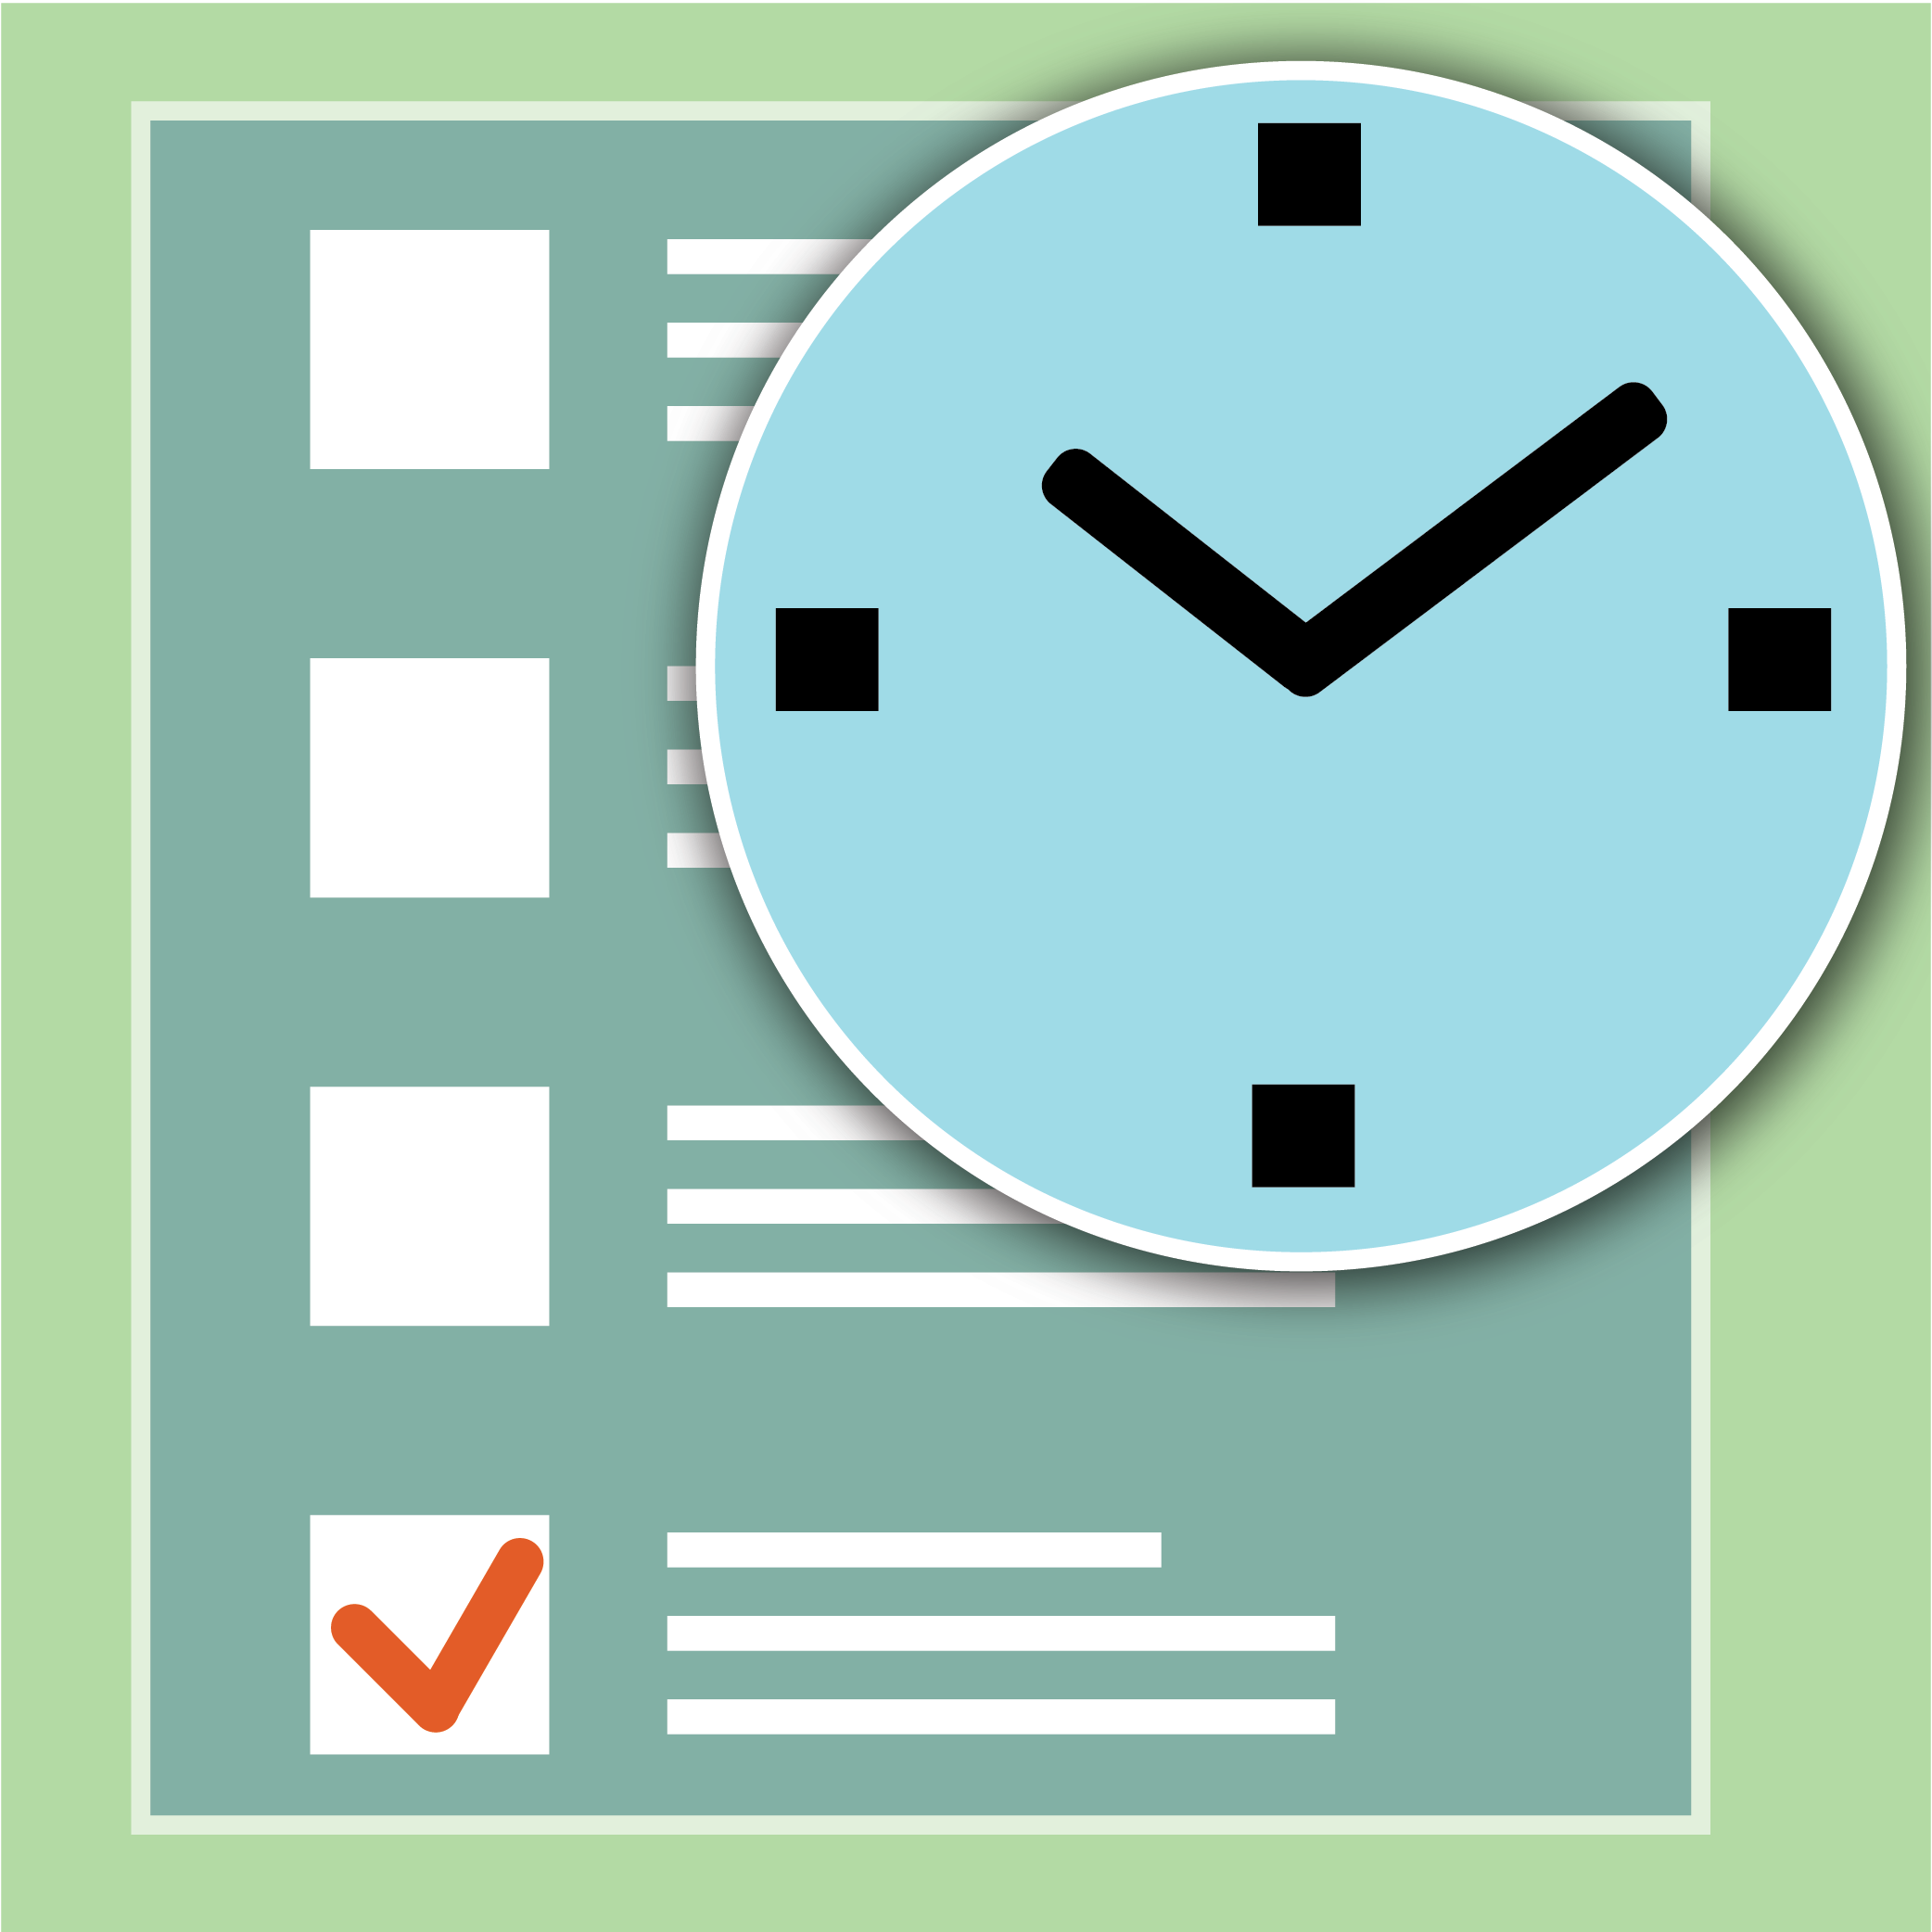 Clock and to-do list illustration 